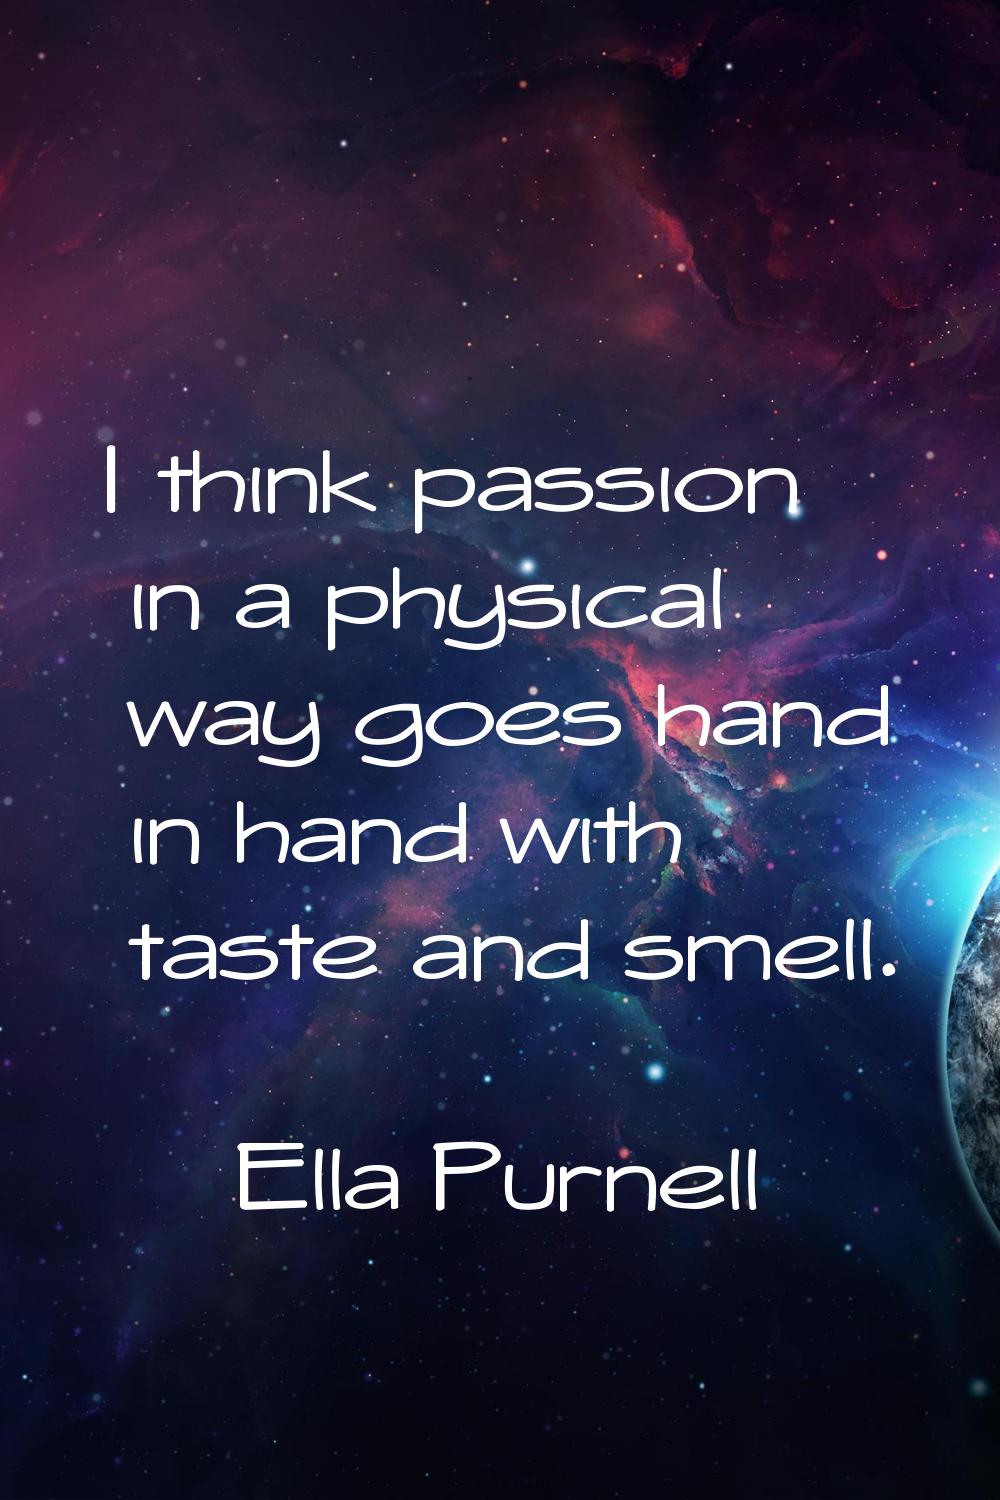 I think passion in a physical way goes hand in hand with taste and smell.